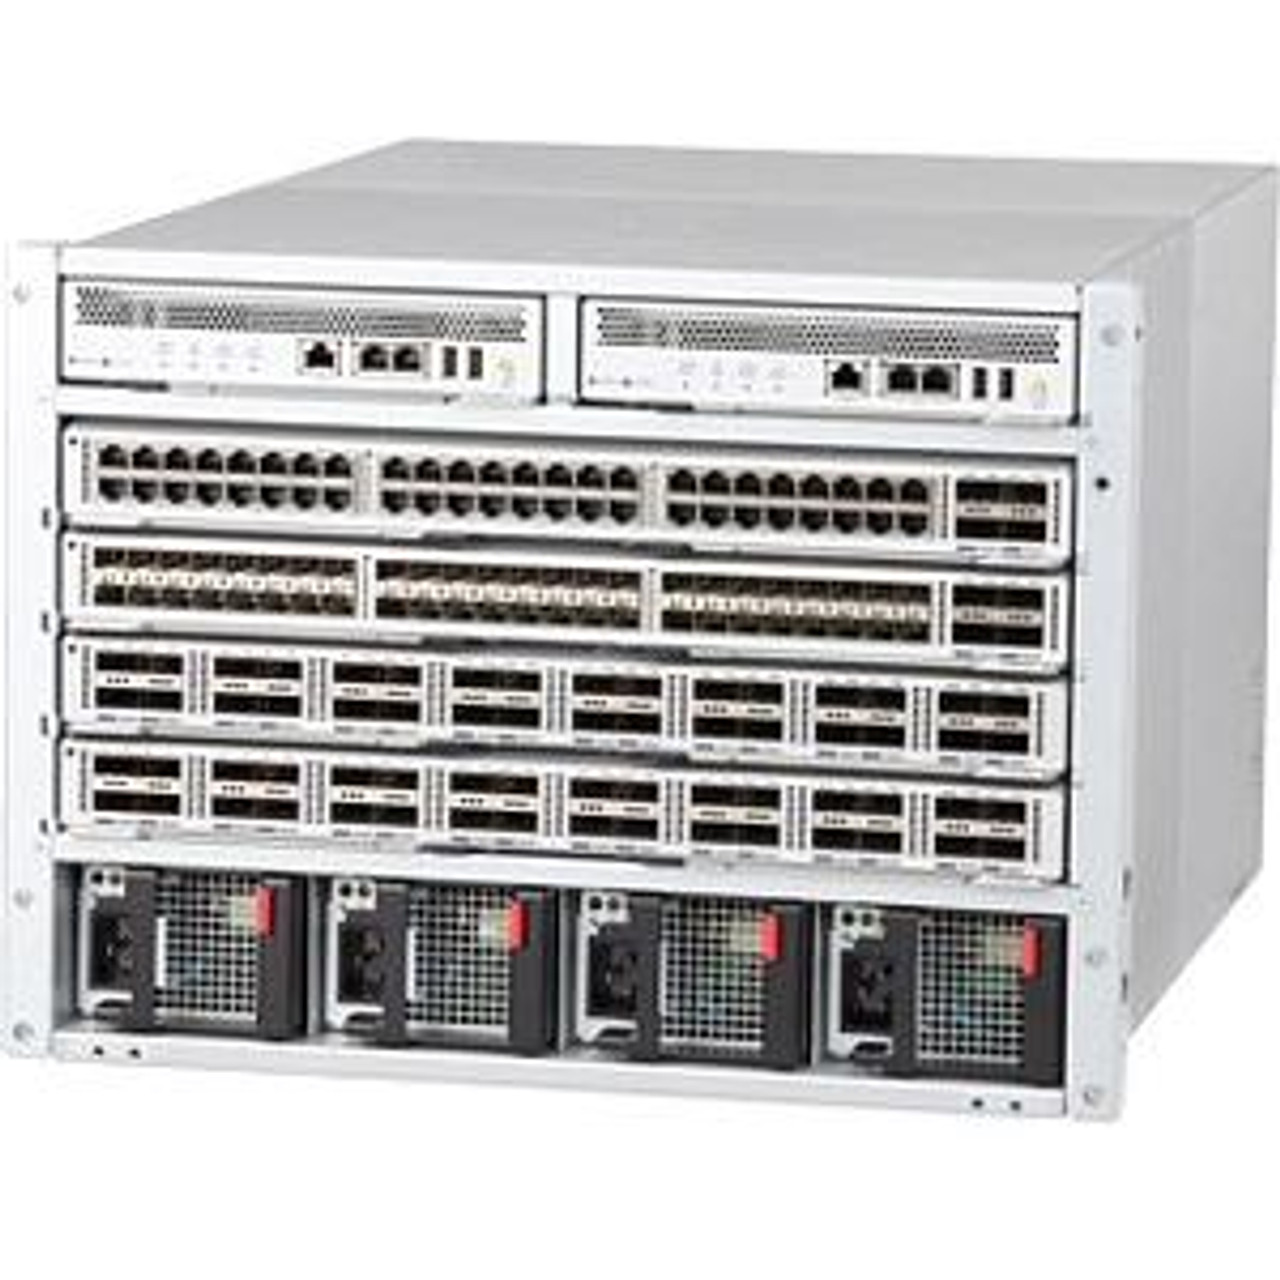 JH815A HP Arista 7304X Switch Chassis 4 Expansion Slot Manageable Modular (Refurbished)